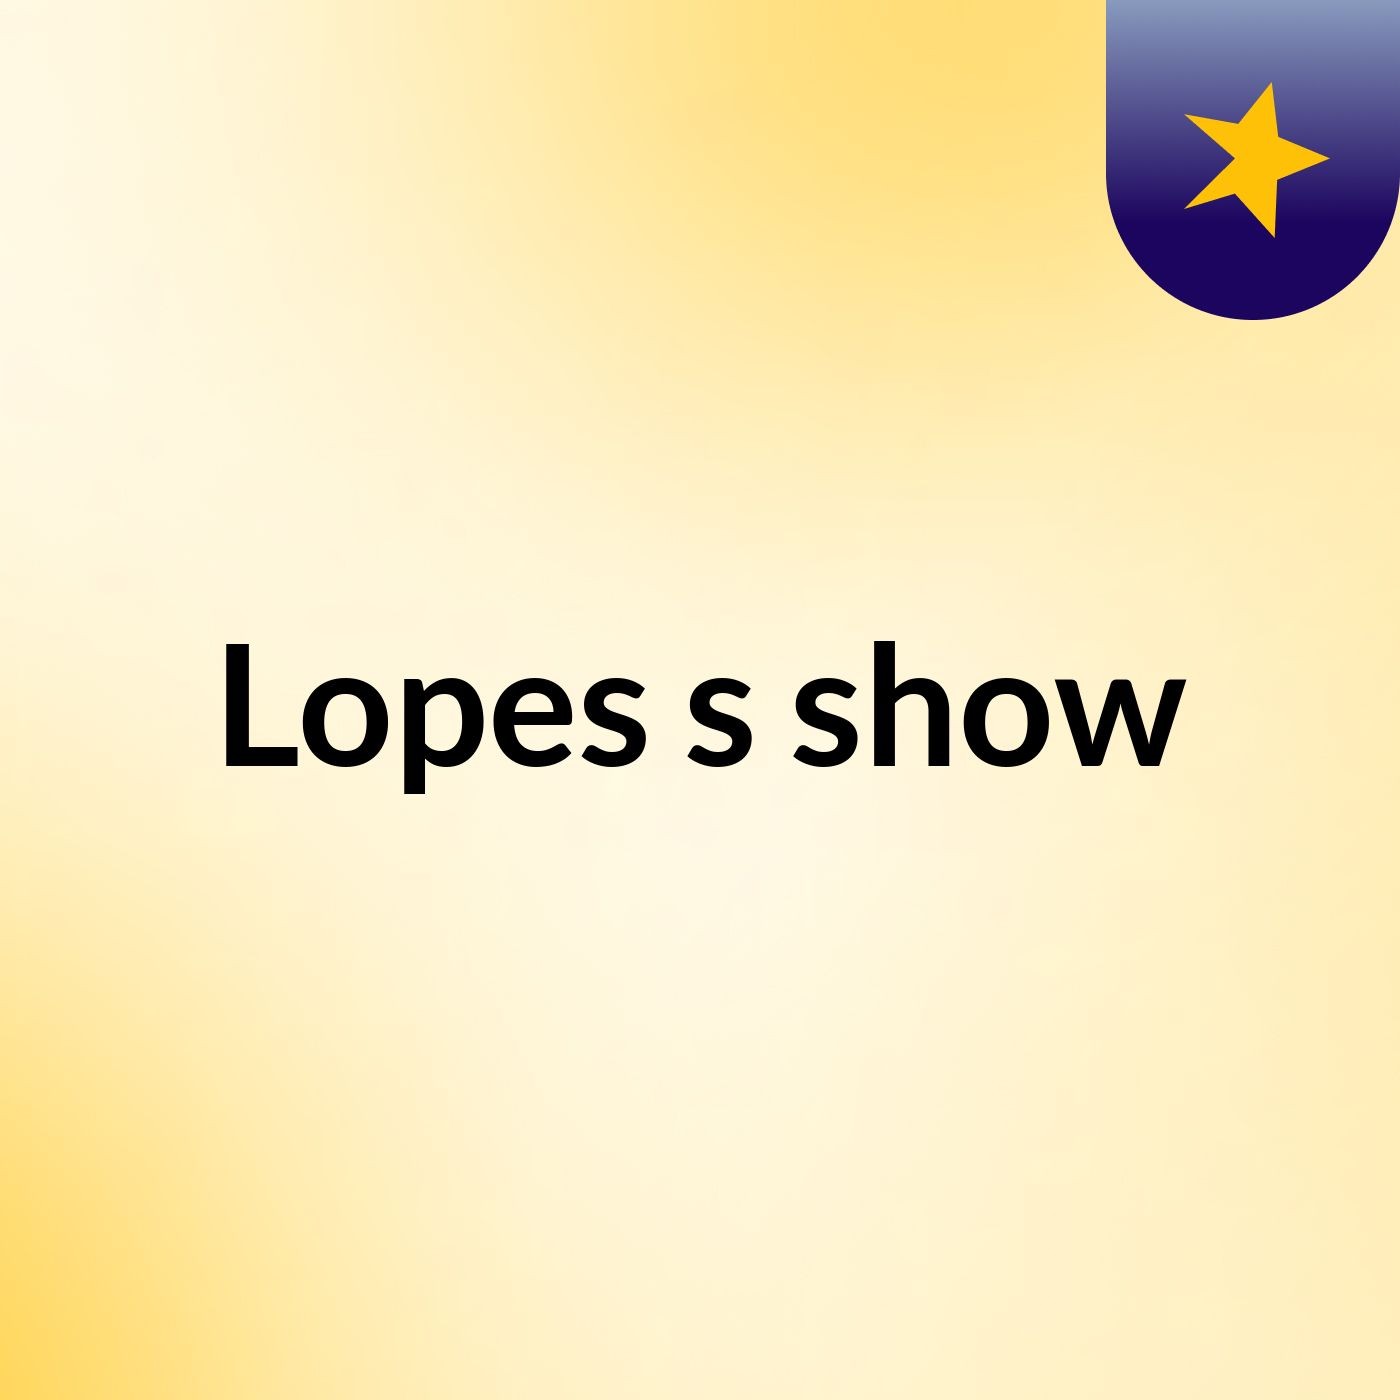 Lopes's show